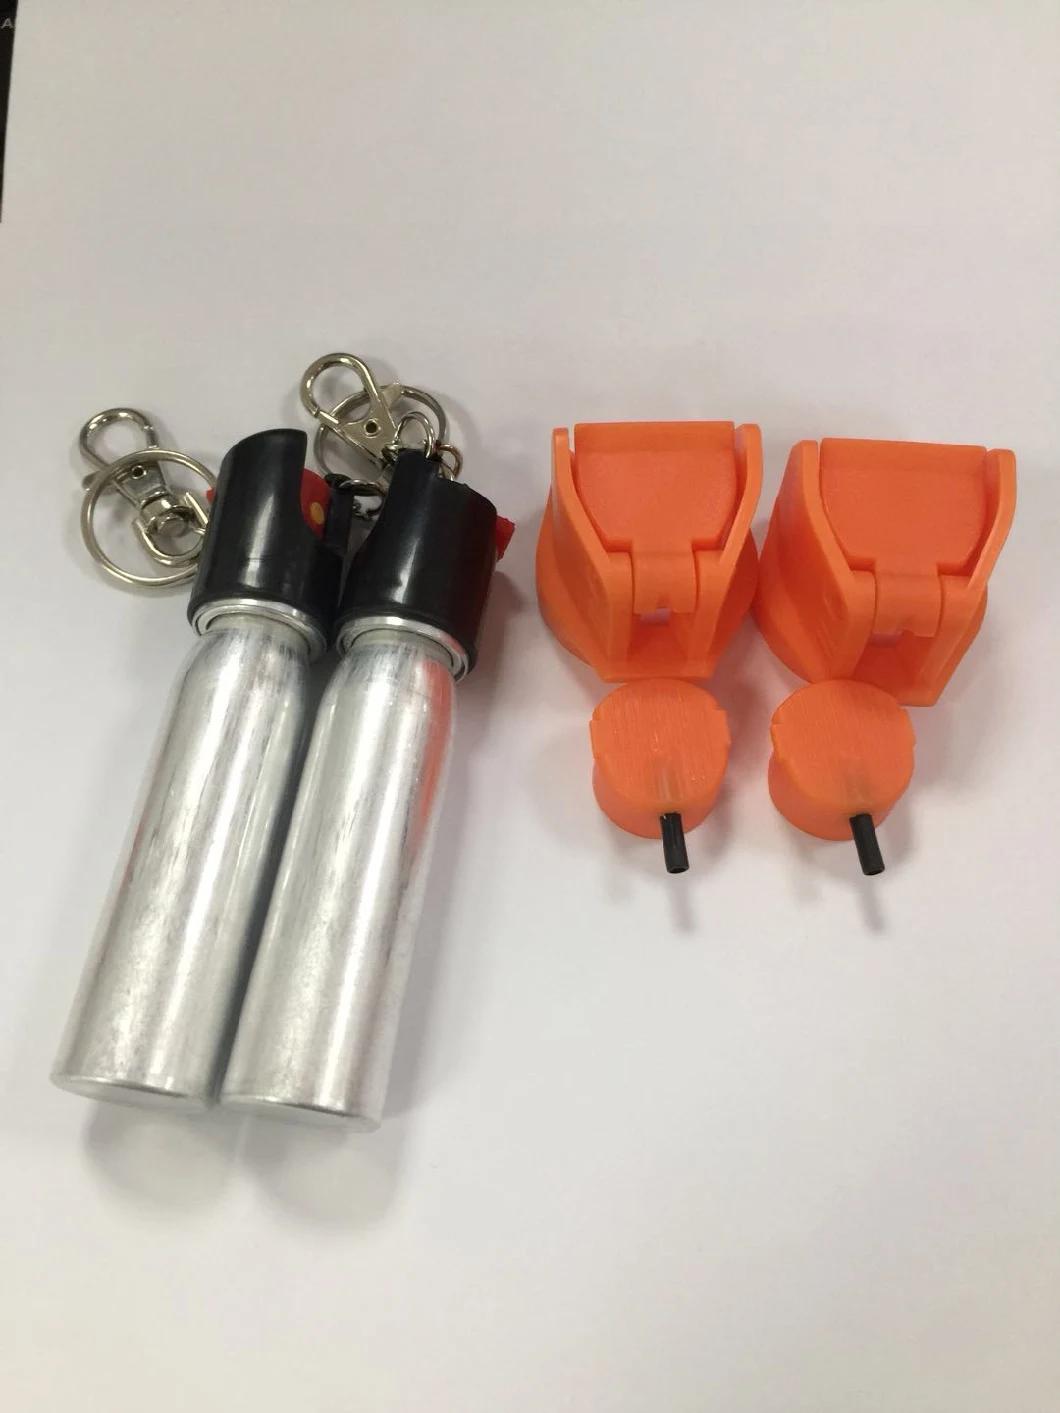 1 Inch Pepper Spray Valve and Actuator Zw1&Zw-1-a